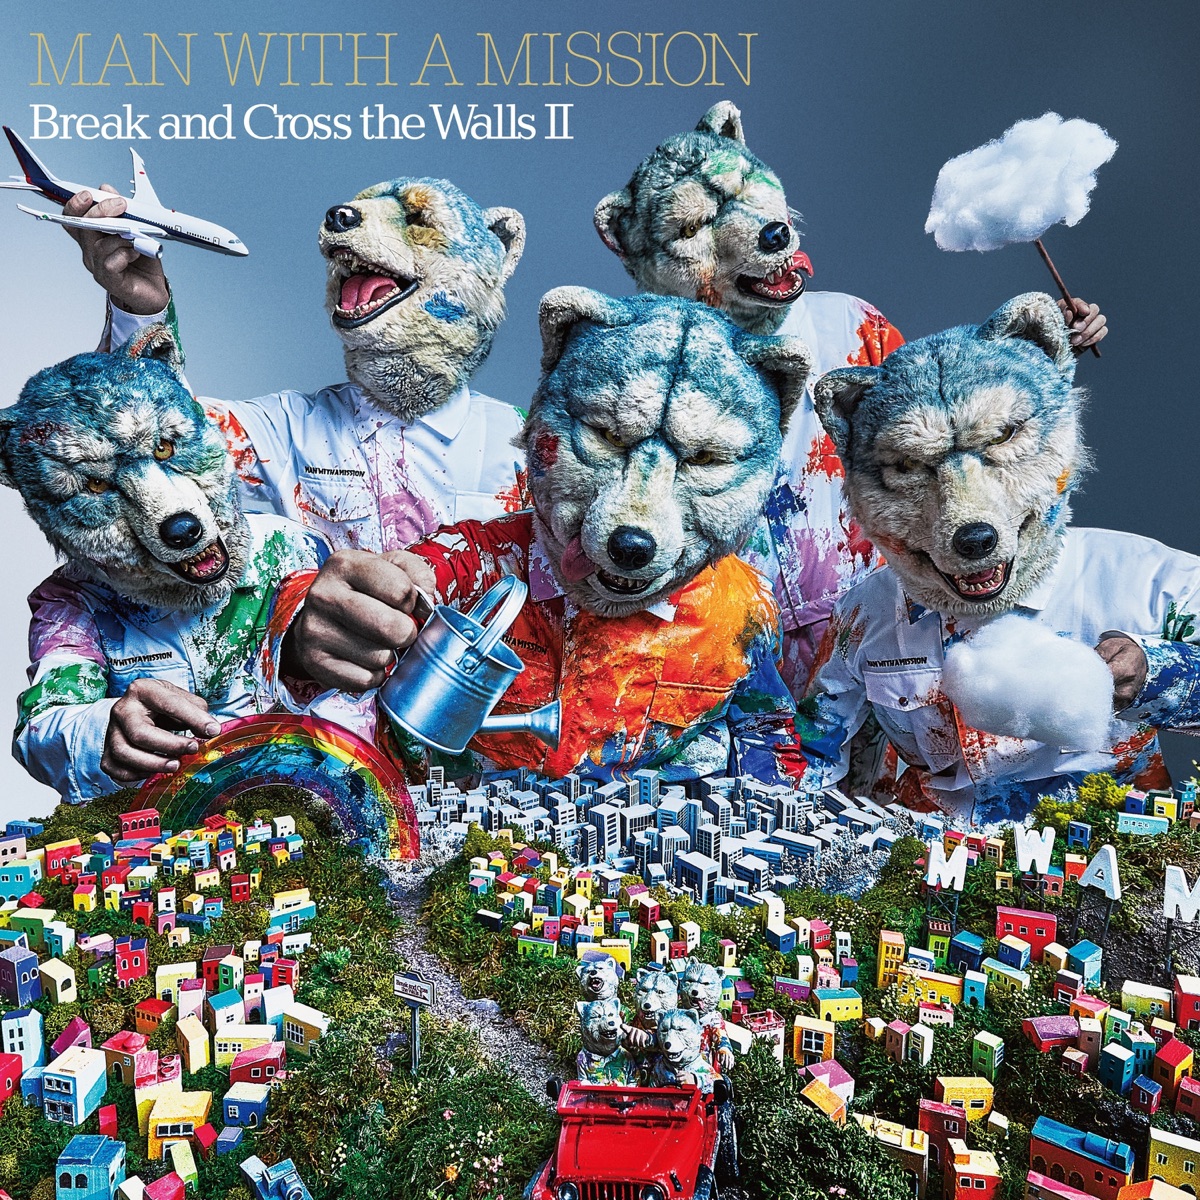 『MAN WITH A MISSION - blue soul』収録の『Break and Cross the Walls Ⅱ』ジャケット